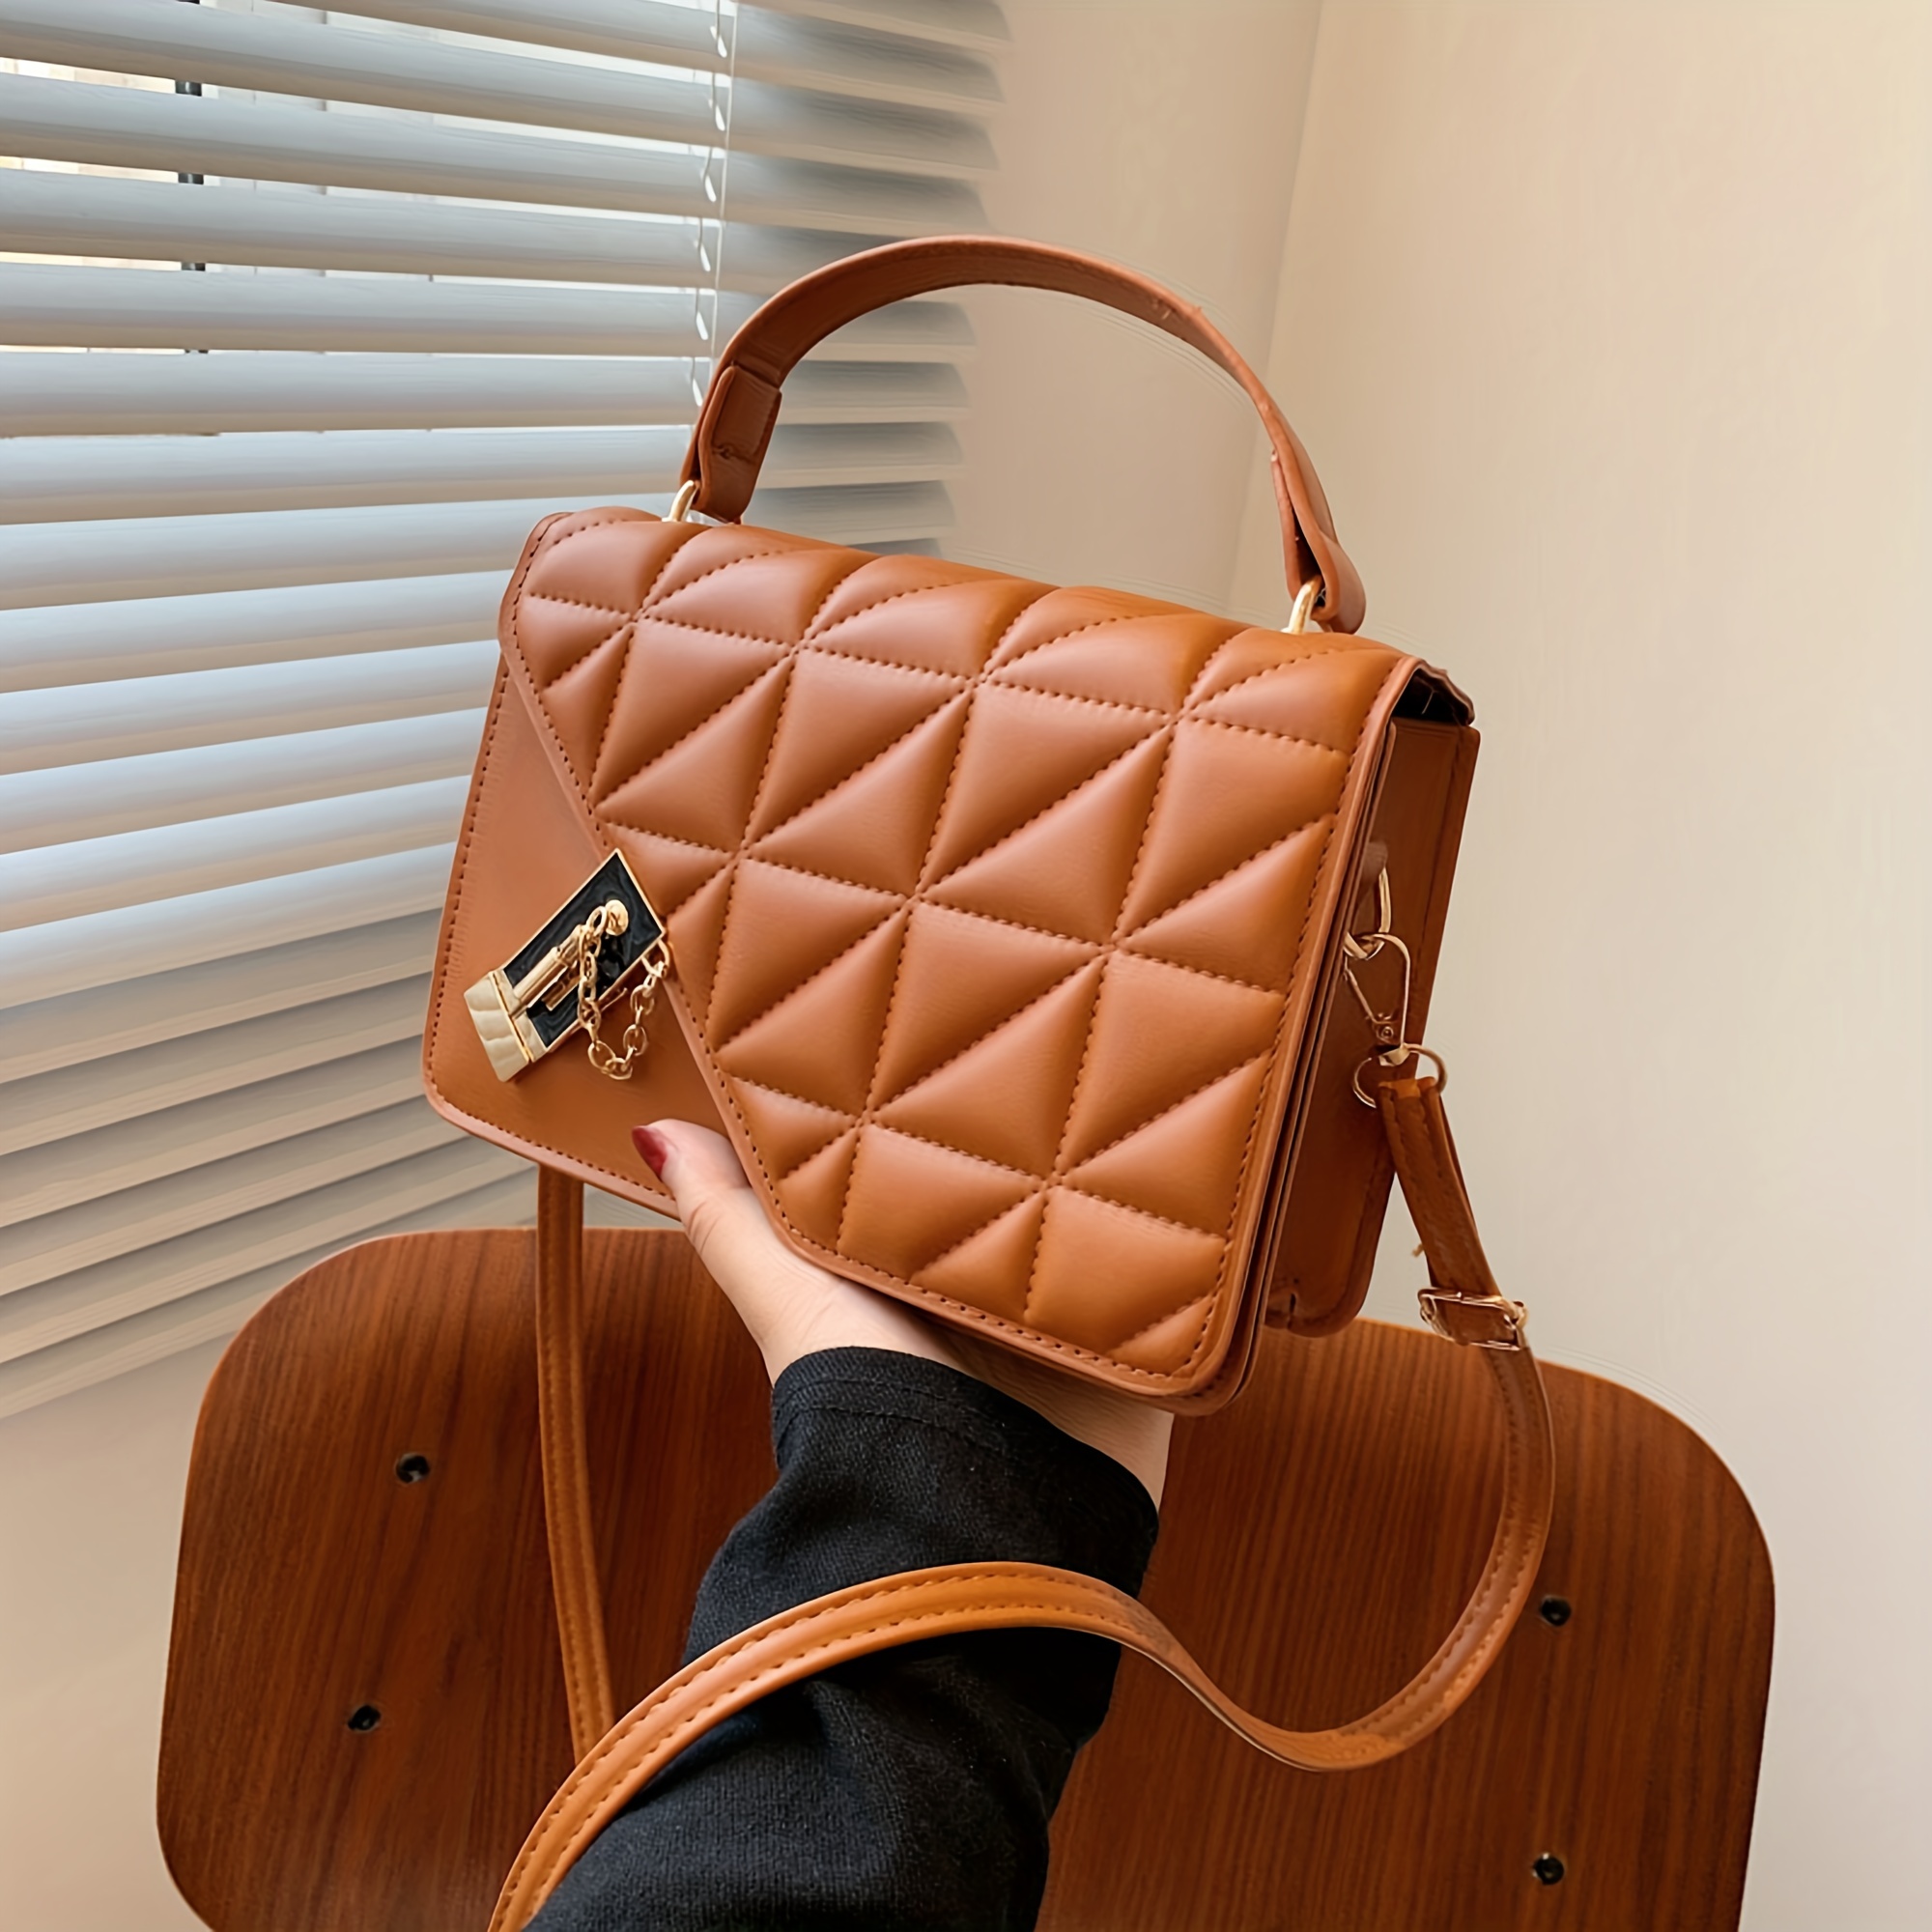 Women's Deluxe Handbags Fashion New High Quality PU Leather